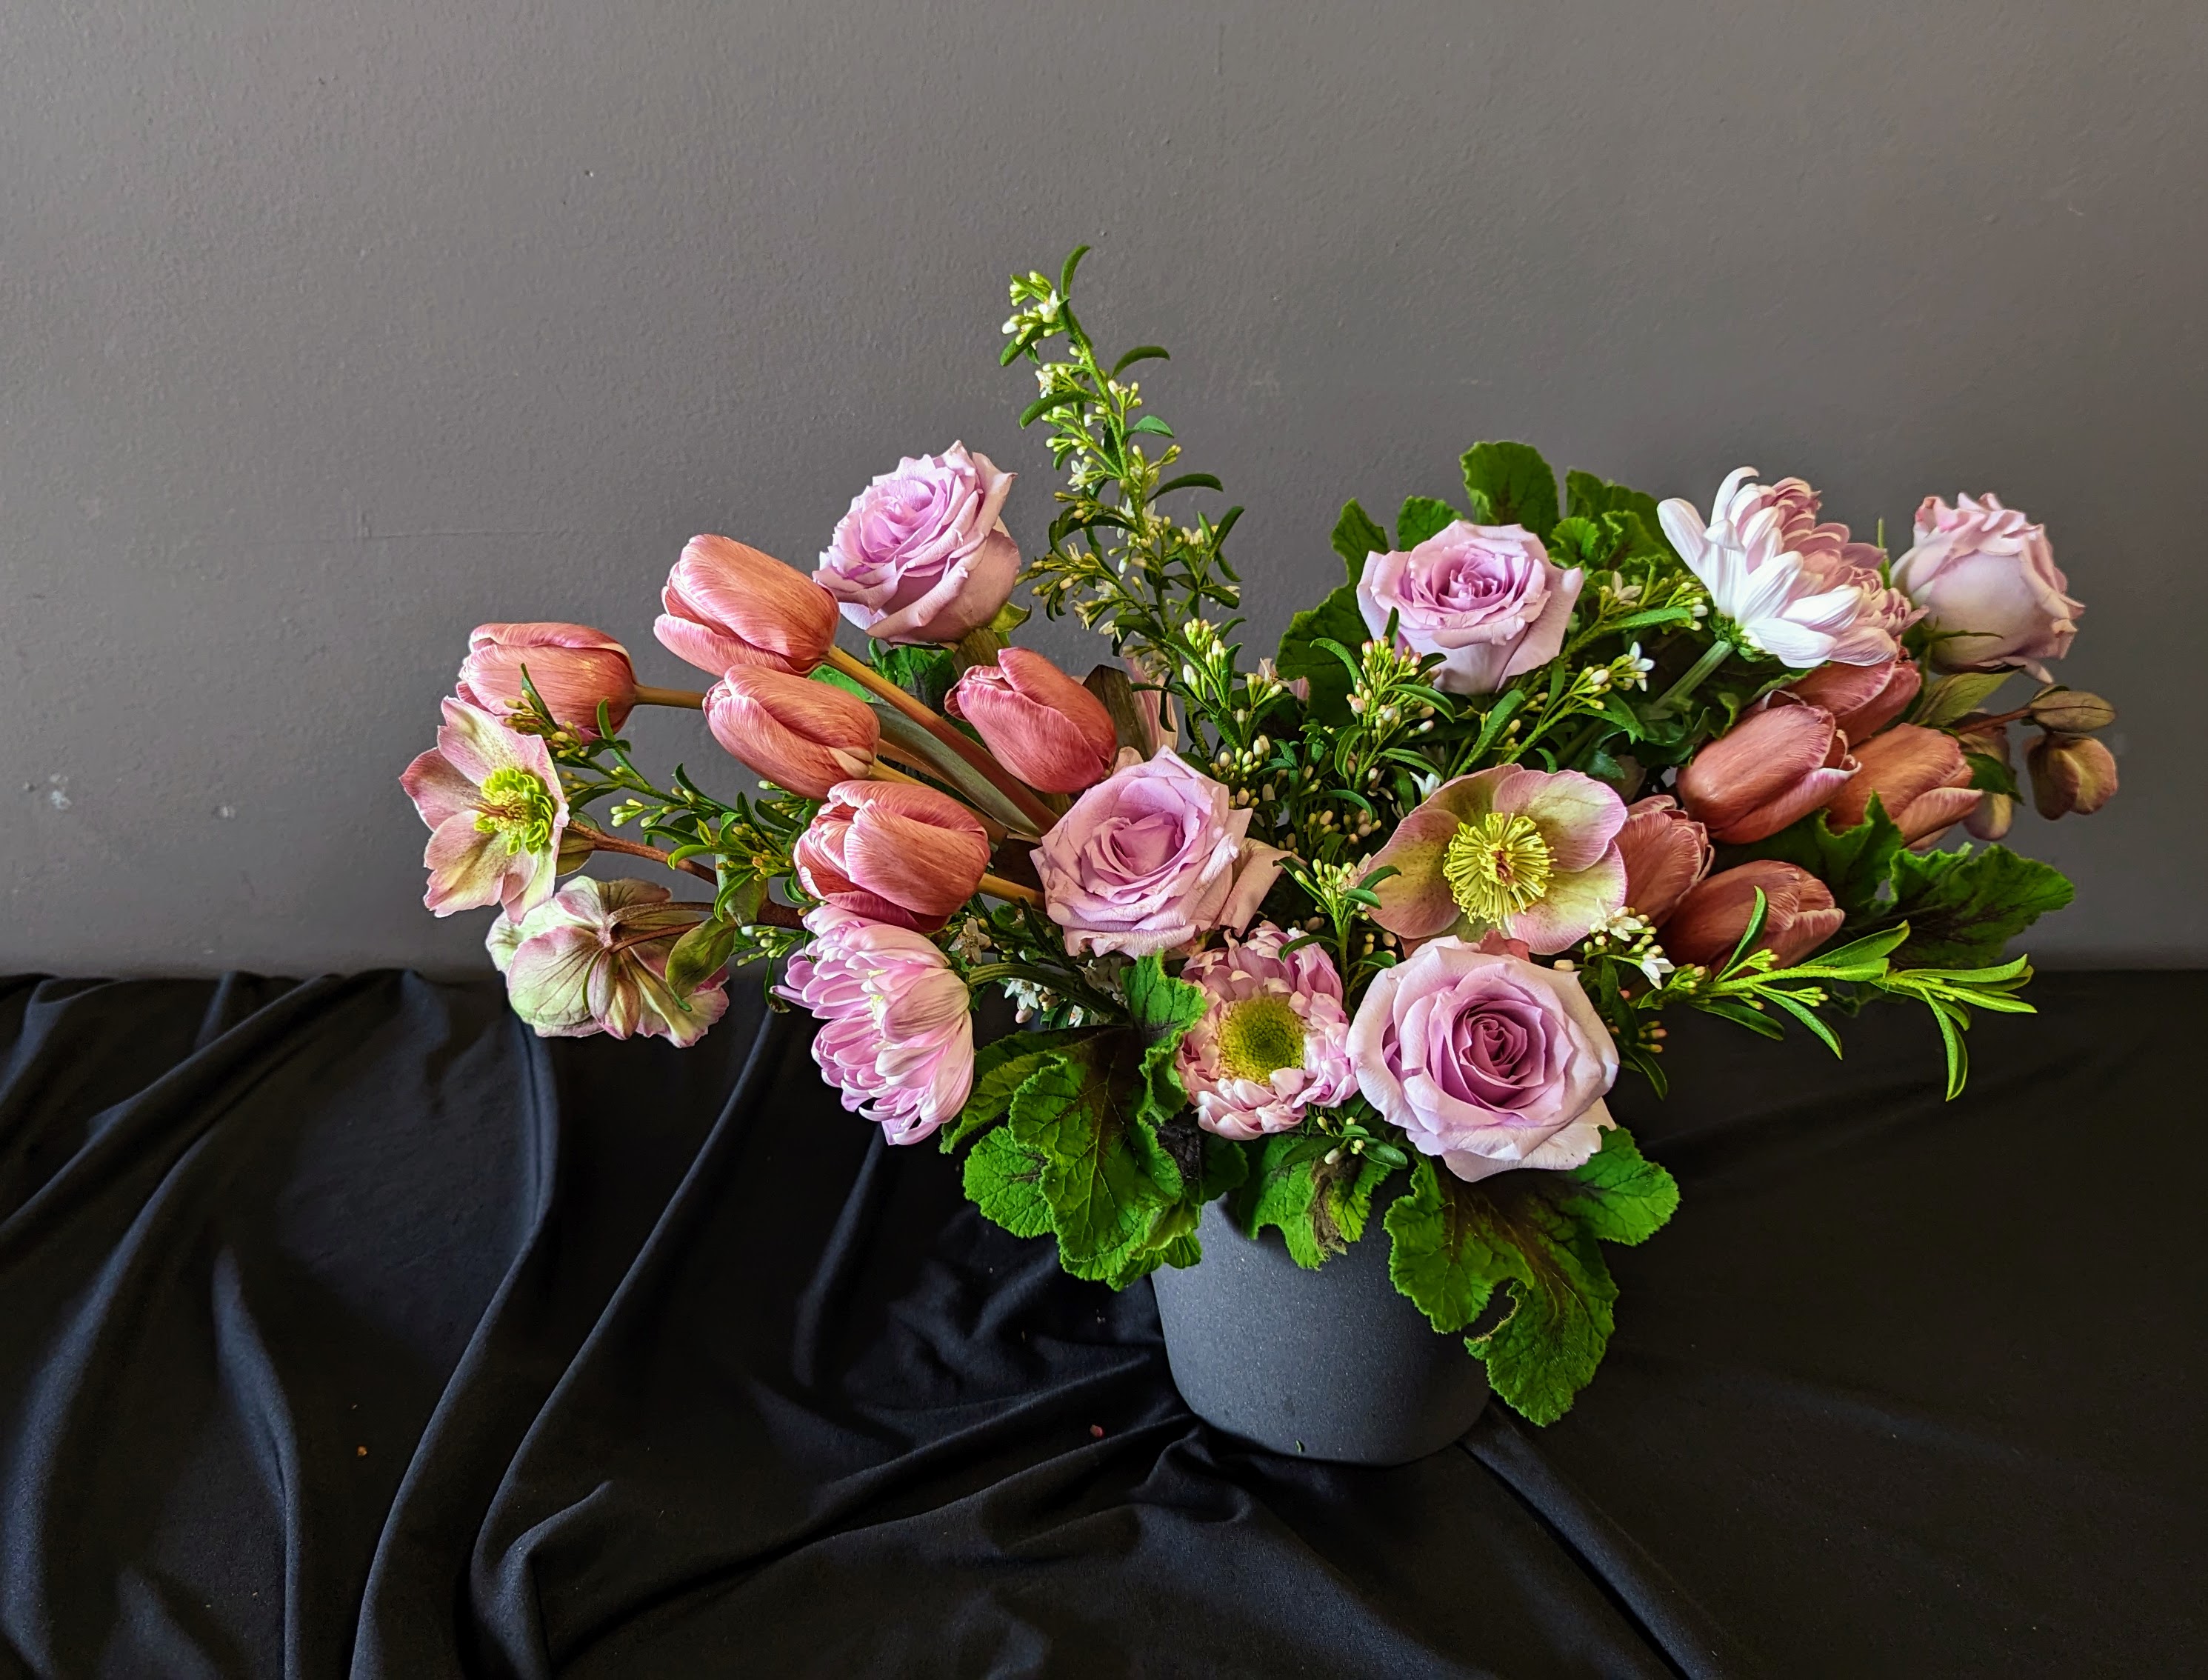 Tulips and Roses in a no foam vase